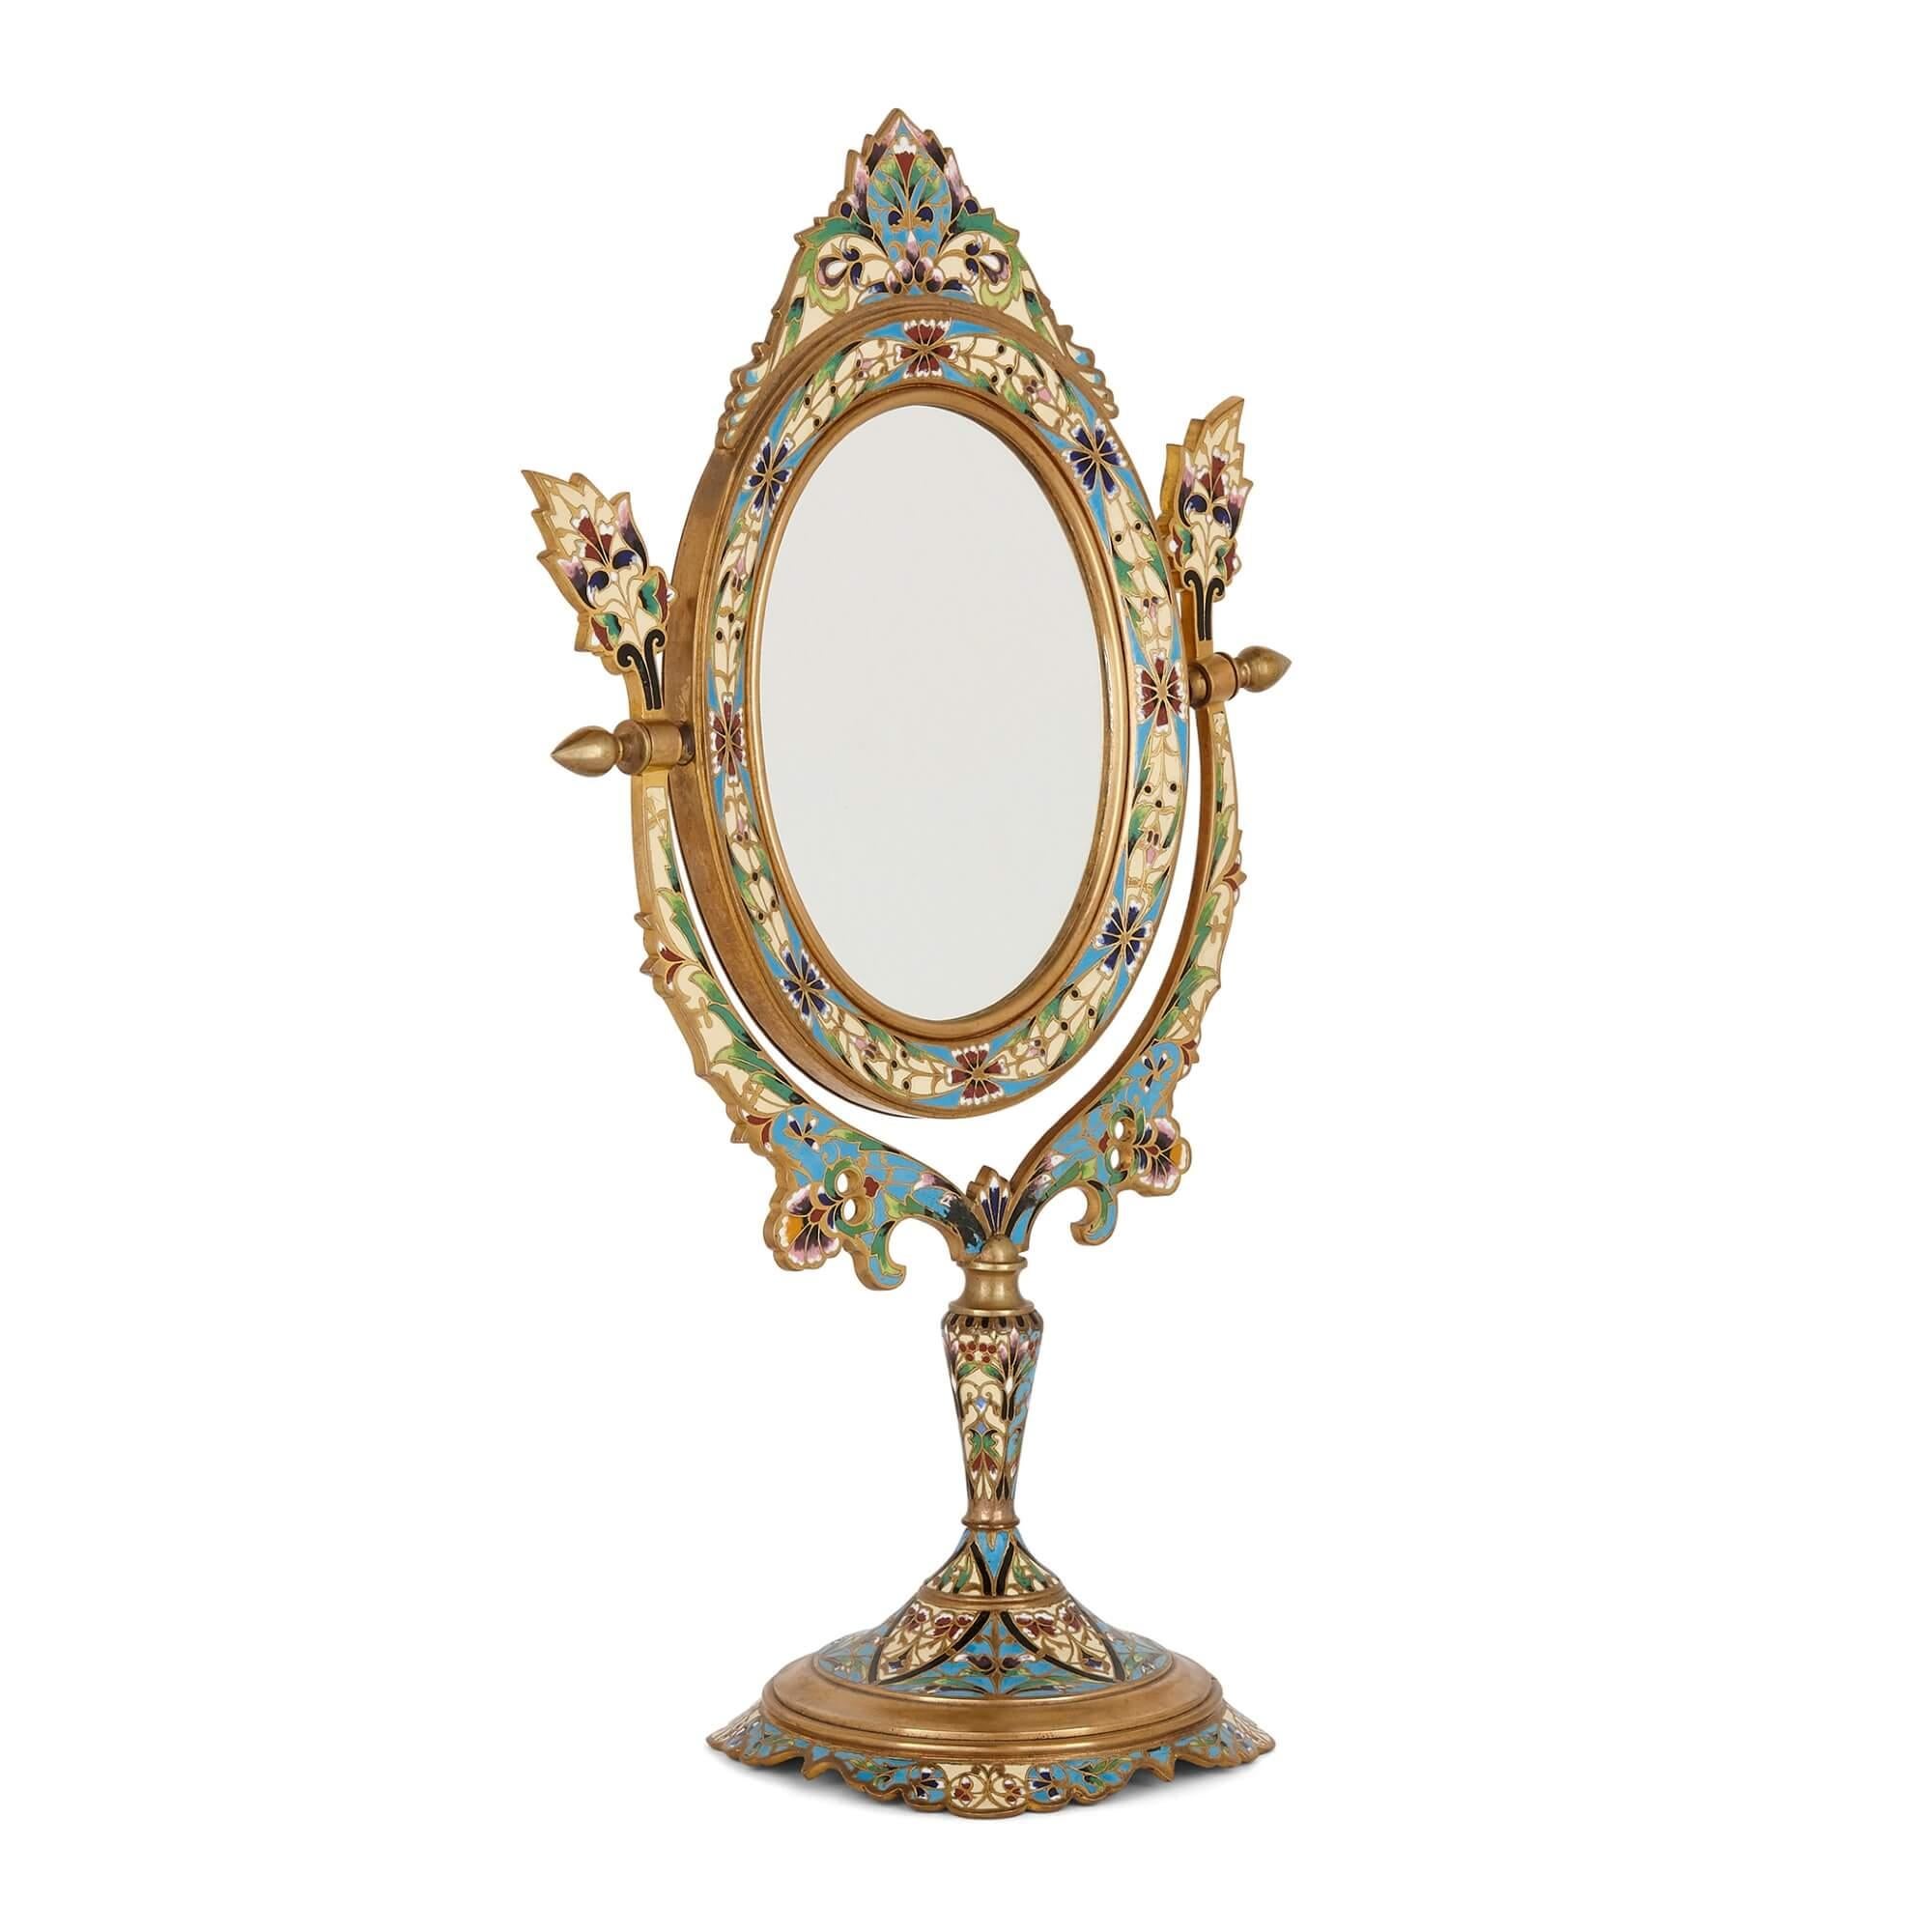 Antique French cloisonné enamel and gilt metal table mirror
French, late 19th century
Height 39cm, width 23cm, depth 12cm

This exquisitely detailed table mirror is intricately decorated all over with cloisonné enamel. The mirror is of oval